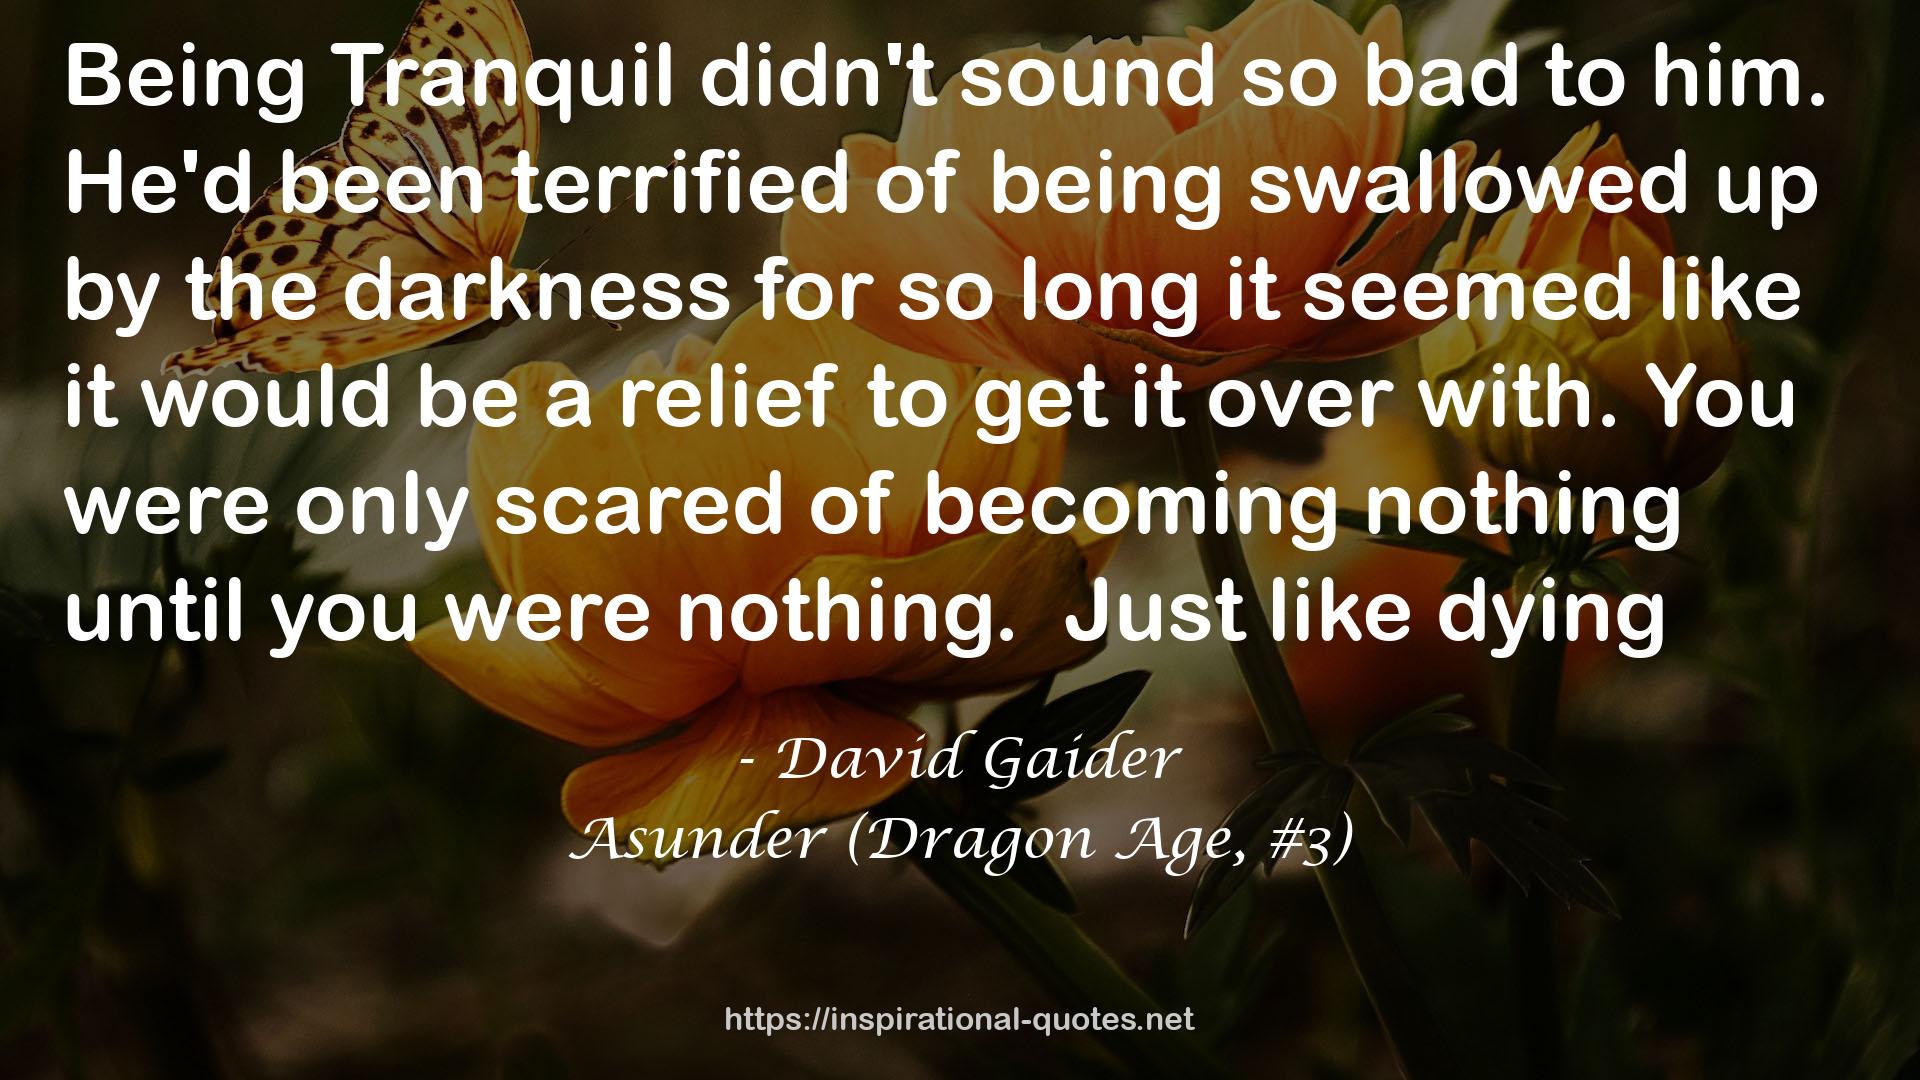 Asunder (Dragon Age, #3) QUOTES